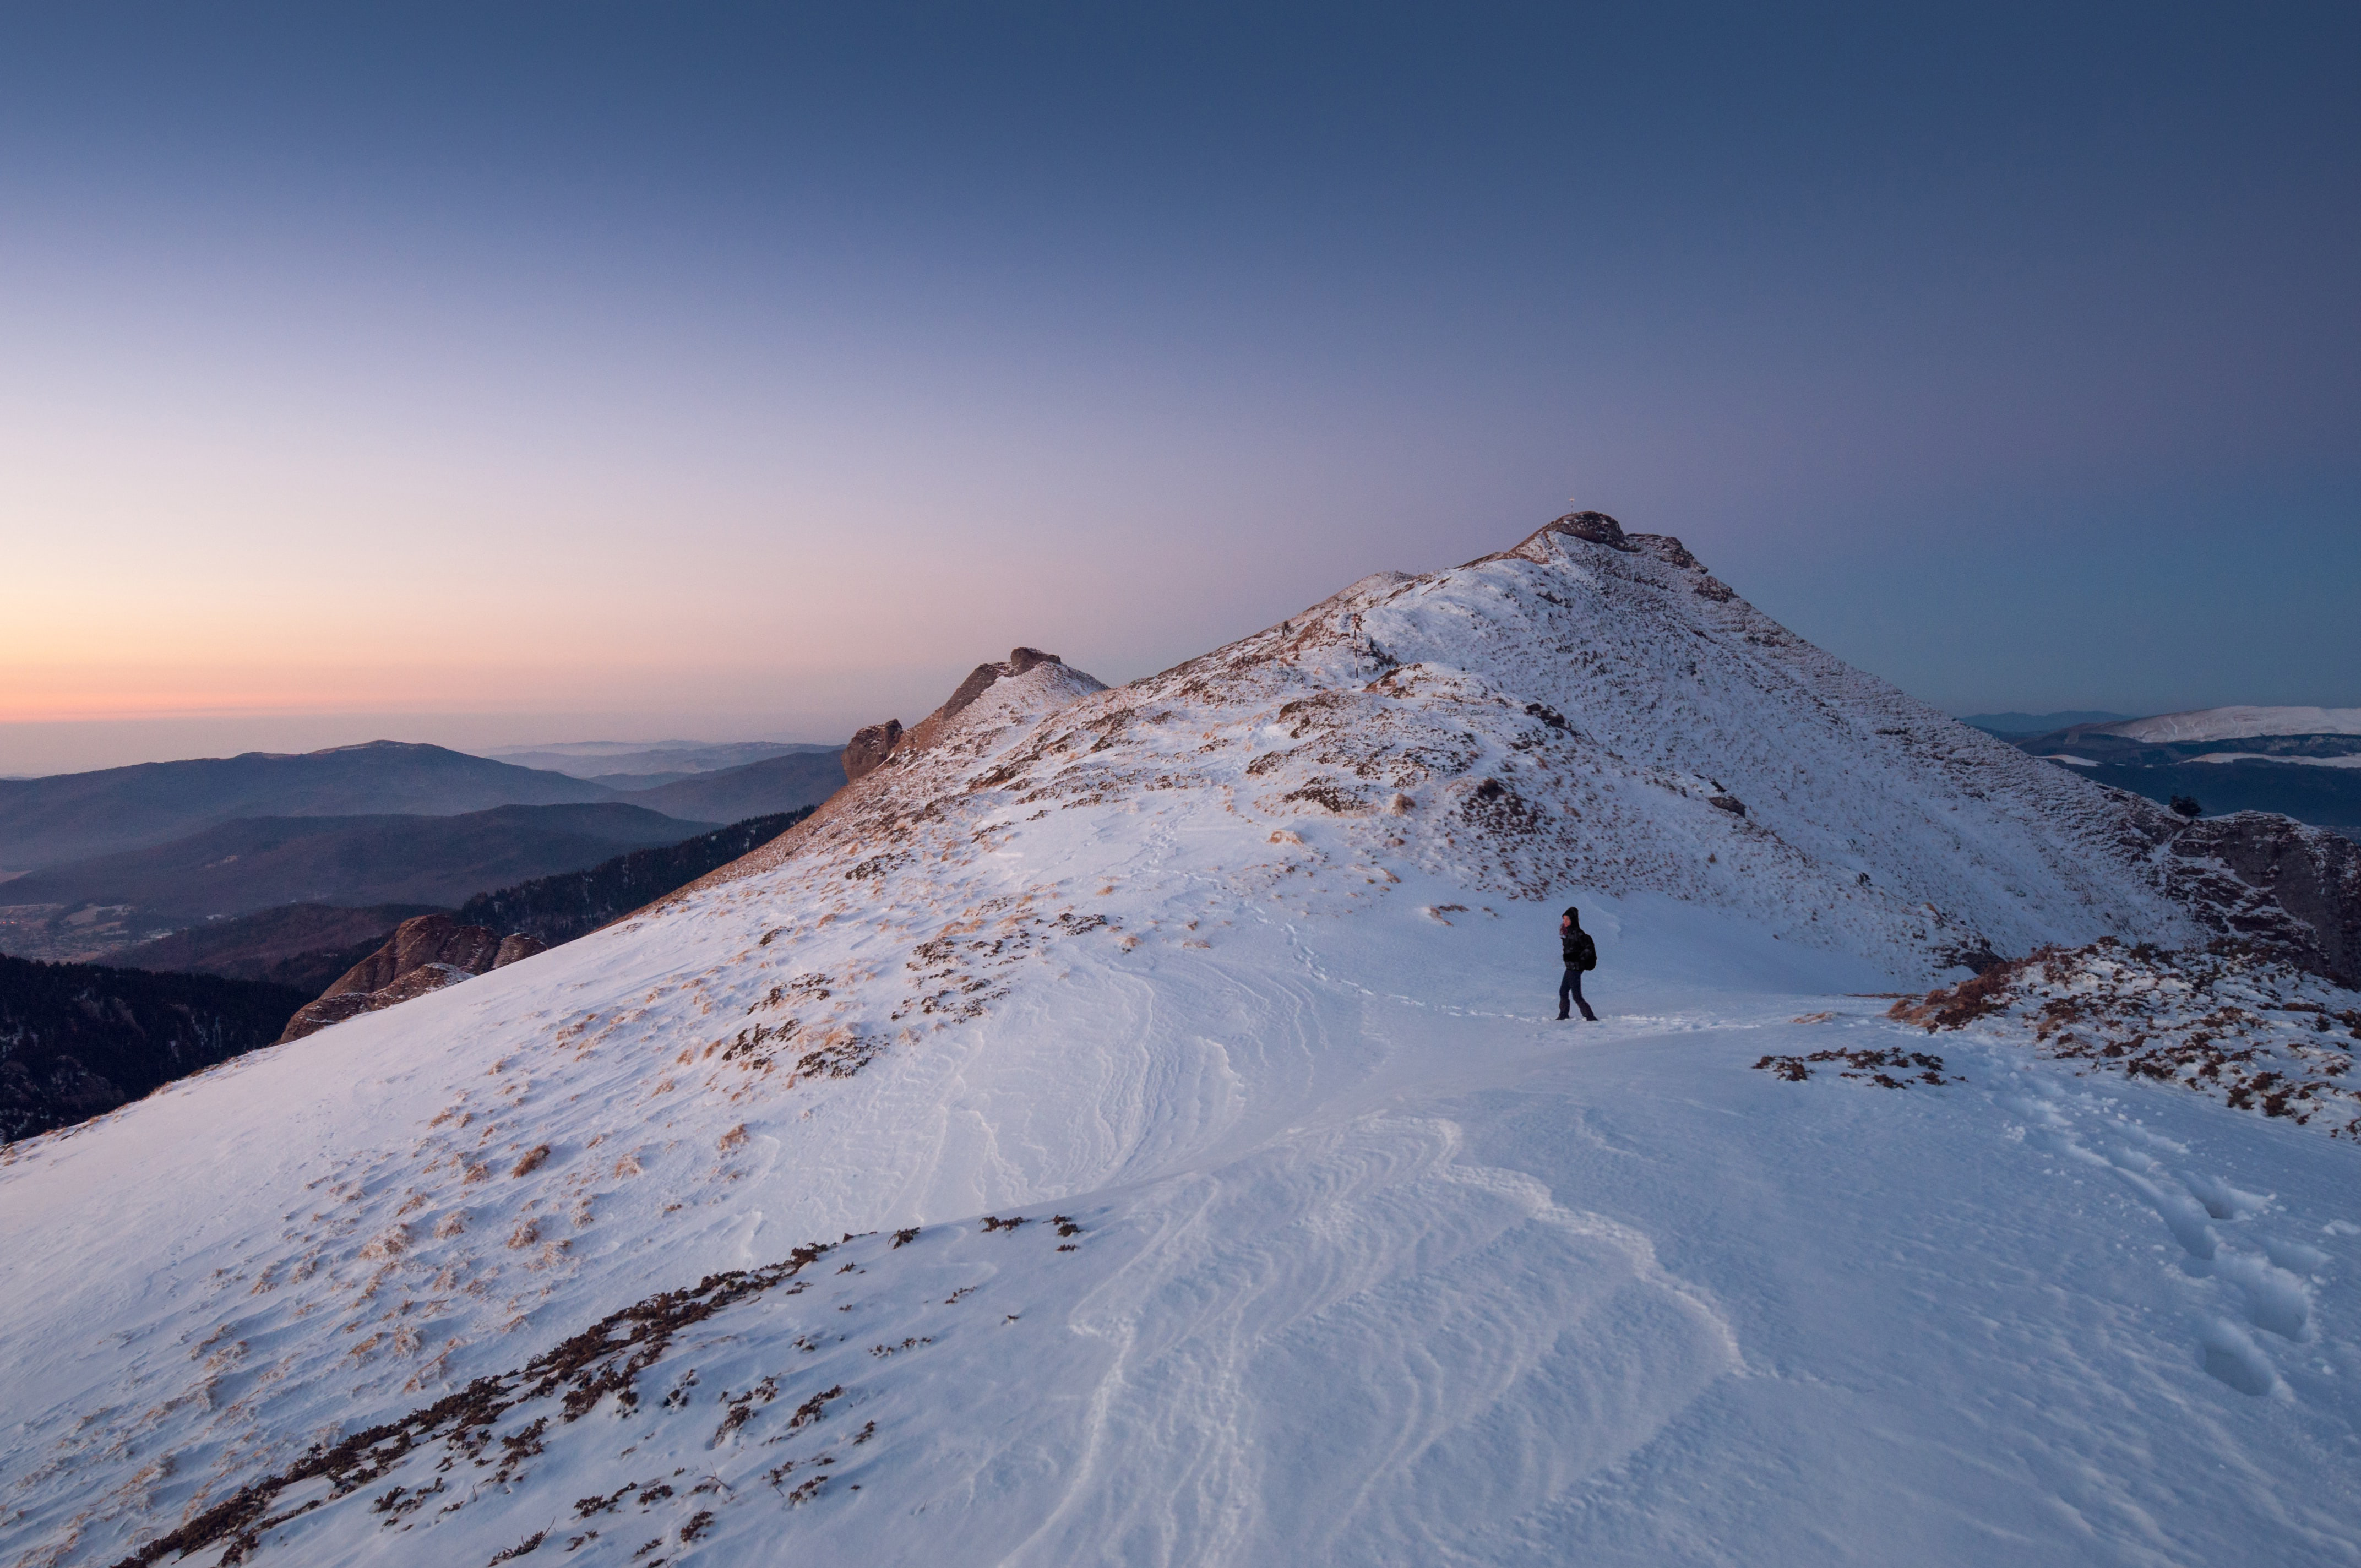 A woman is hiking on a snowy mountain at dawn